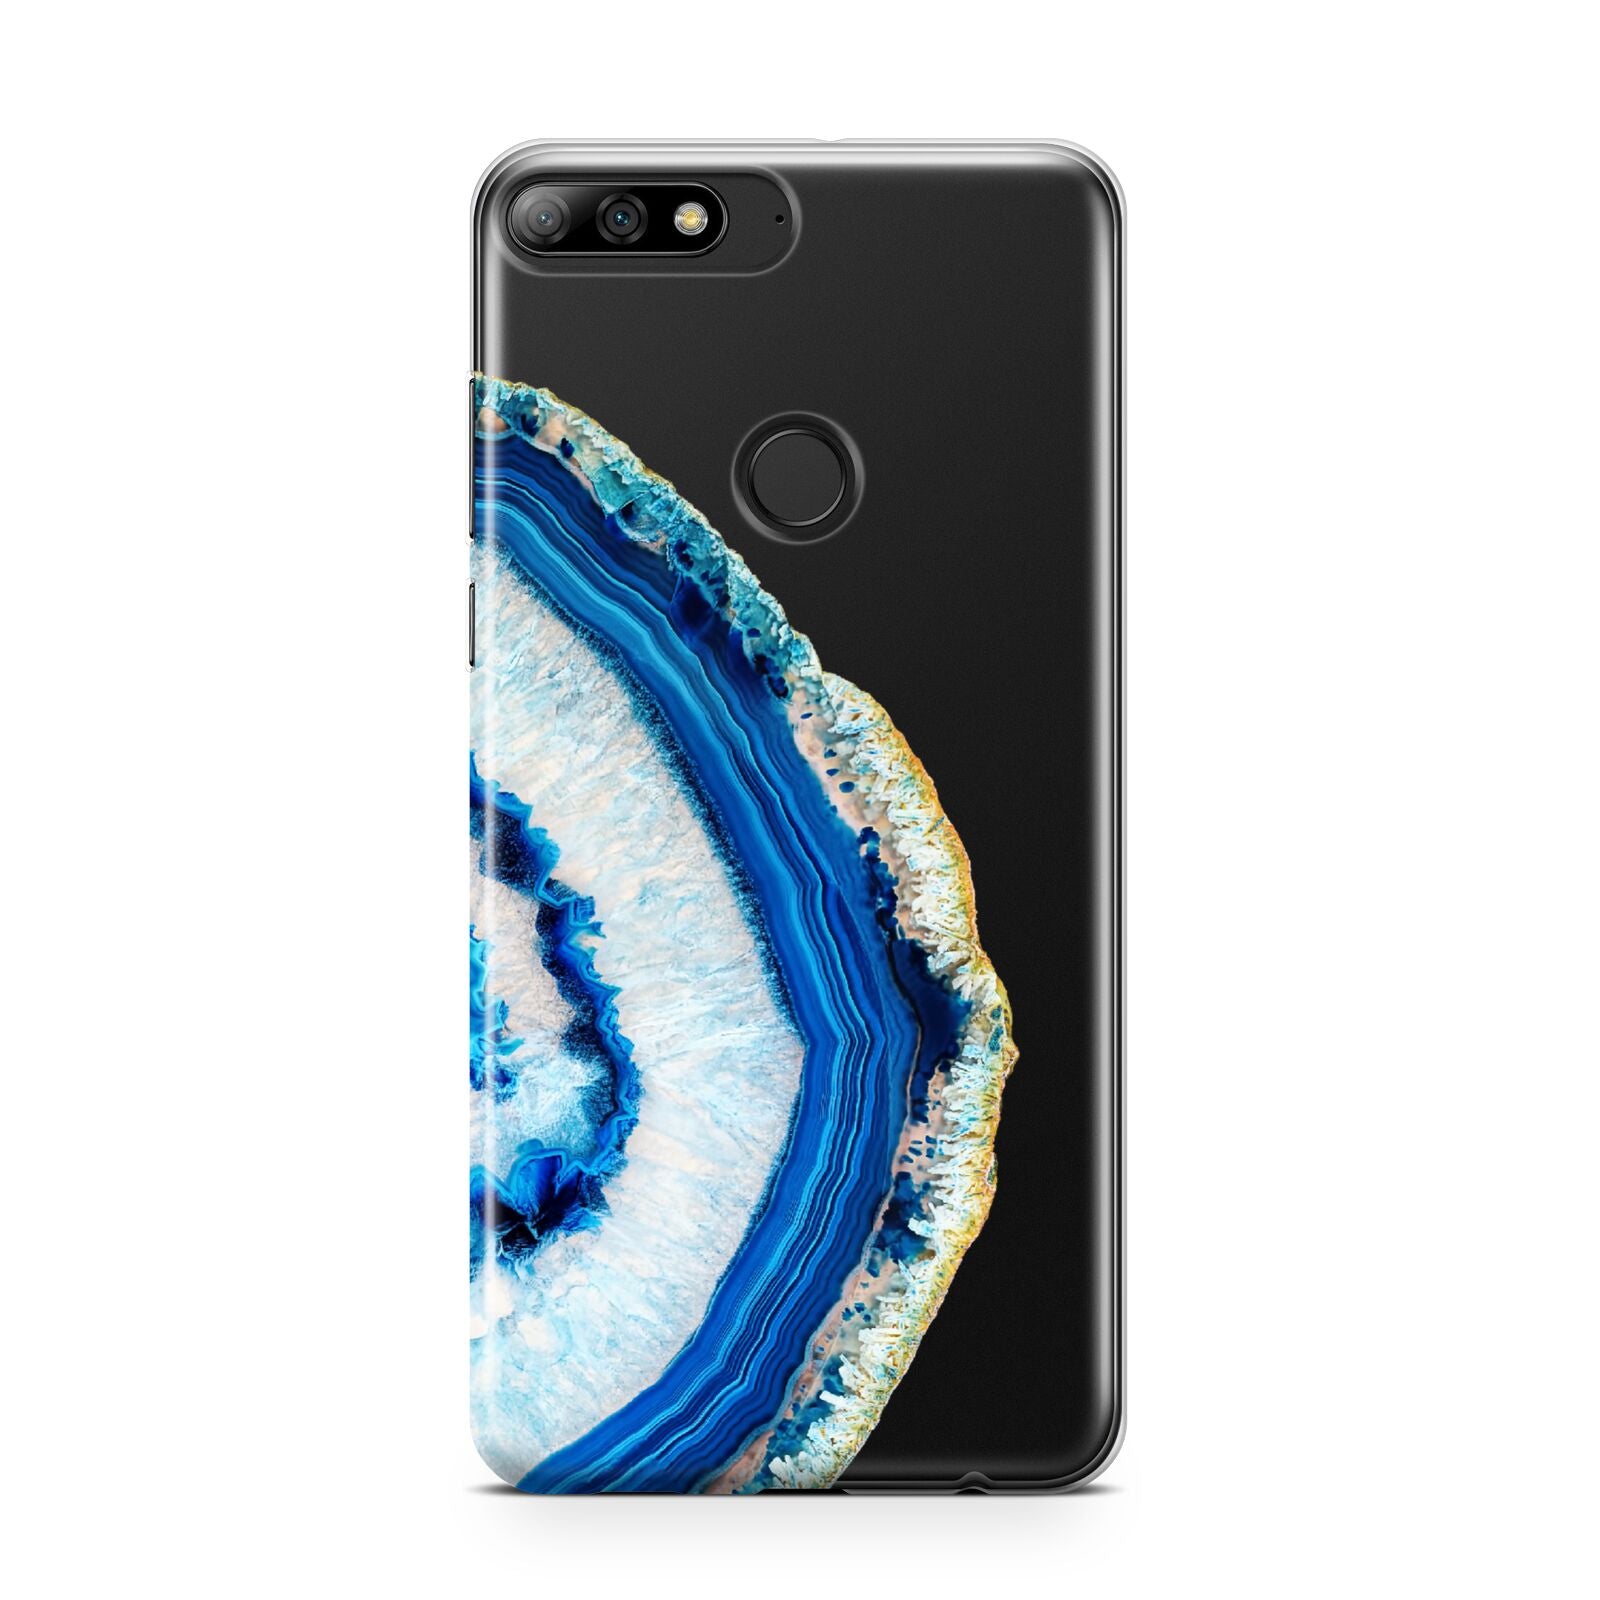 Agate Dark Blue and Turquoise Huawei Y7 2018